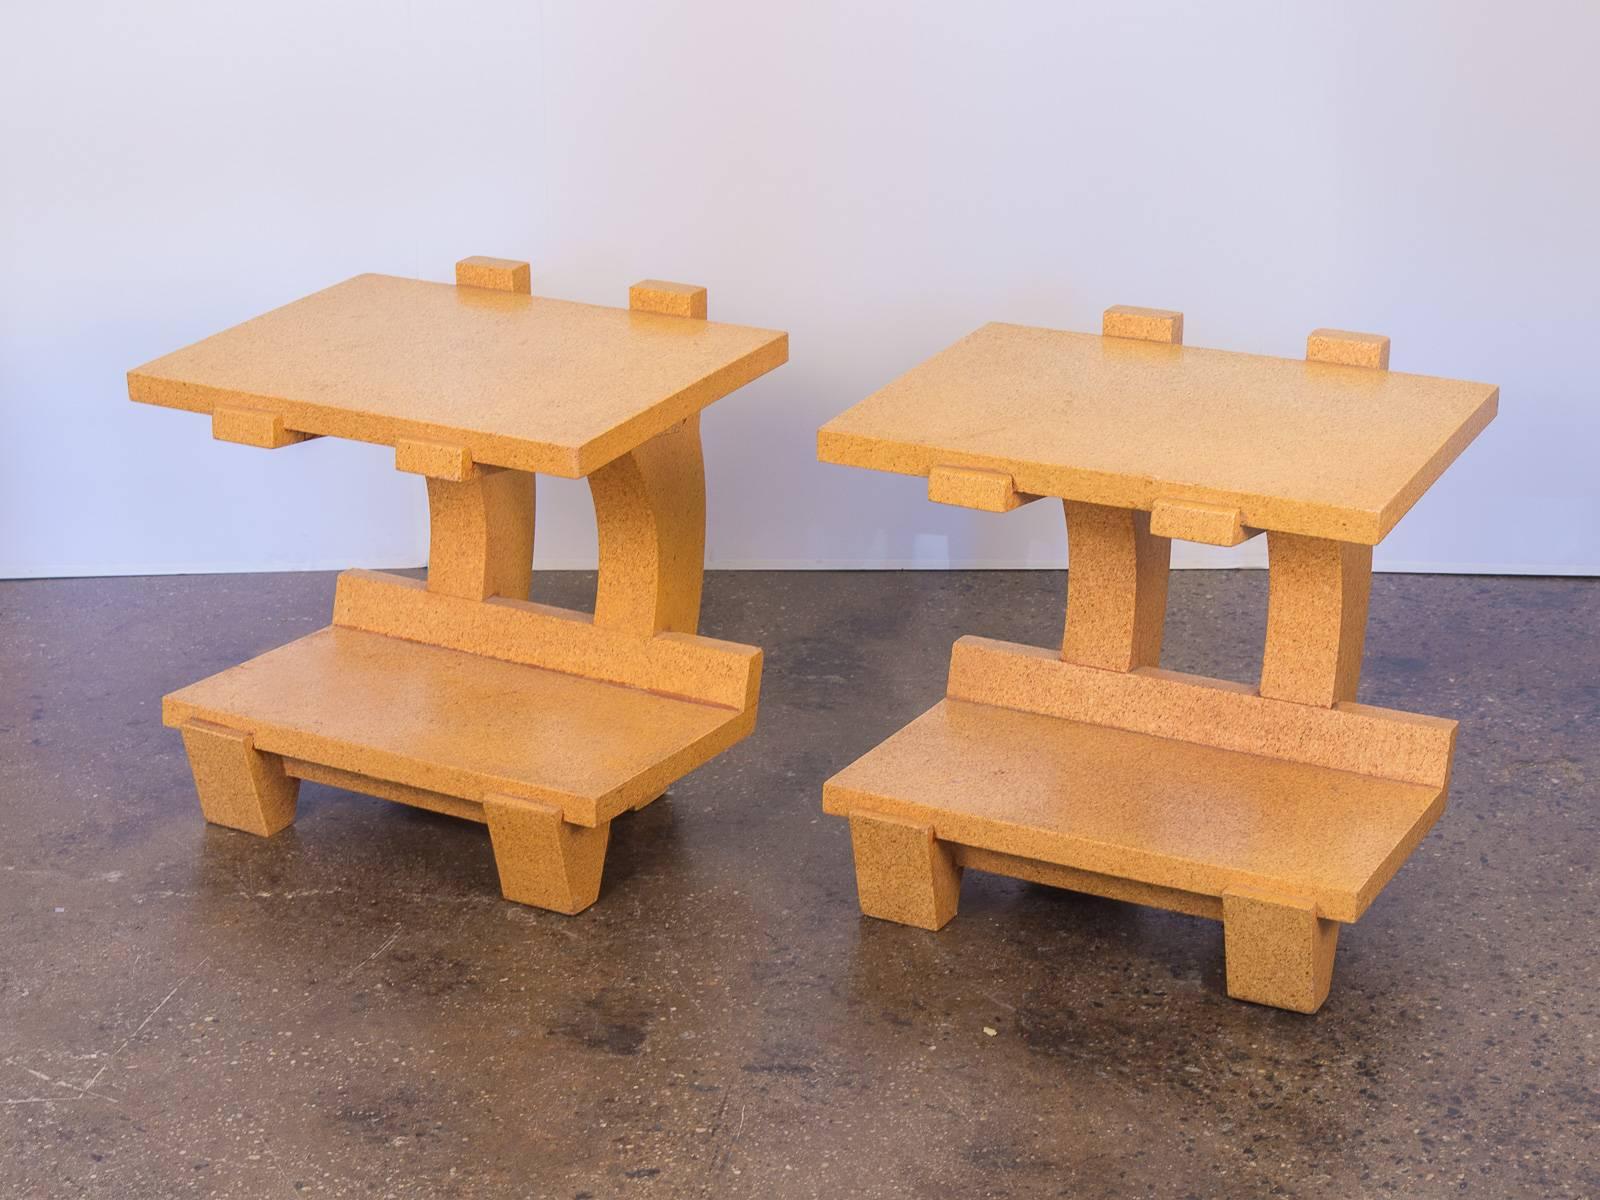 Sold as a pair. Postmodern pair of cork side tables by Kevin Walz for KorQinc. Cantilever form is geometrically striking without appearing chunky. Cork material gives a contemporary freshness and texture. In wonderful vintage condition with